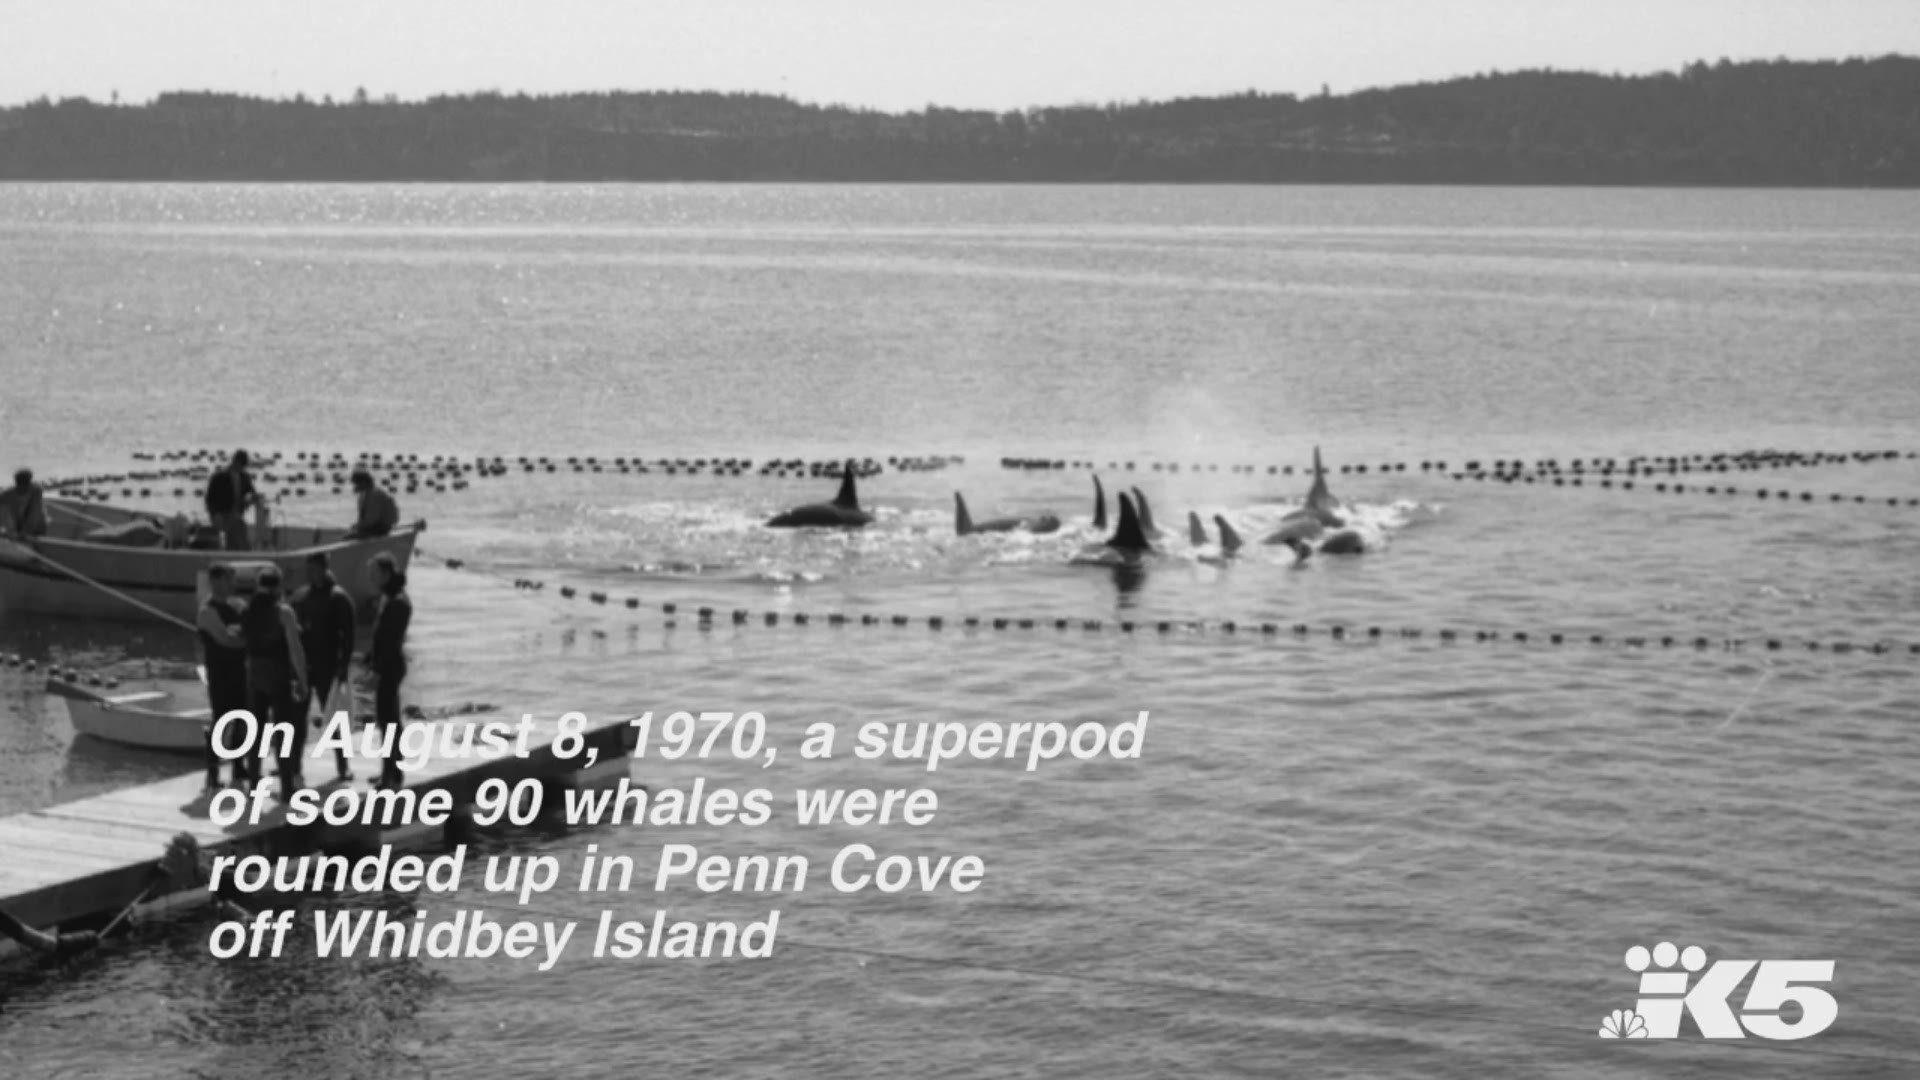 On August 8, 1970, some 90 orcas were rounded up in Penn Cove. Six were captured and sent to marine parks. Another five were killed in the process.